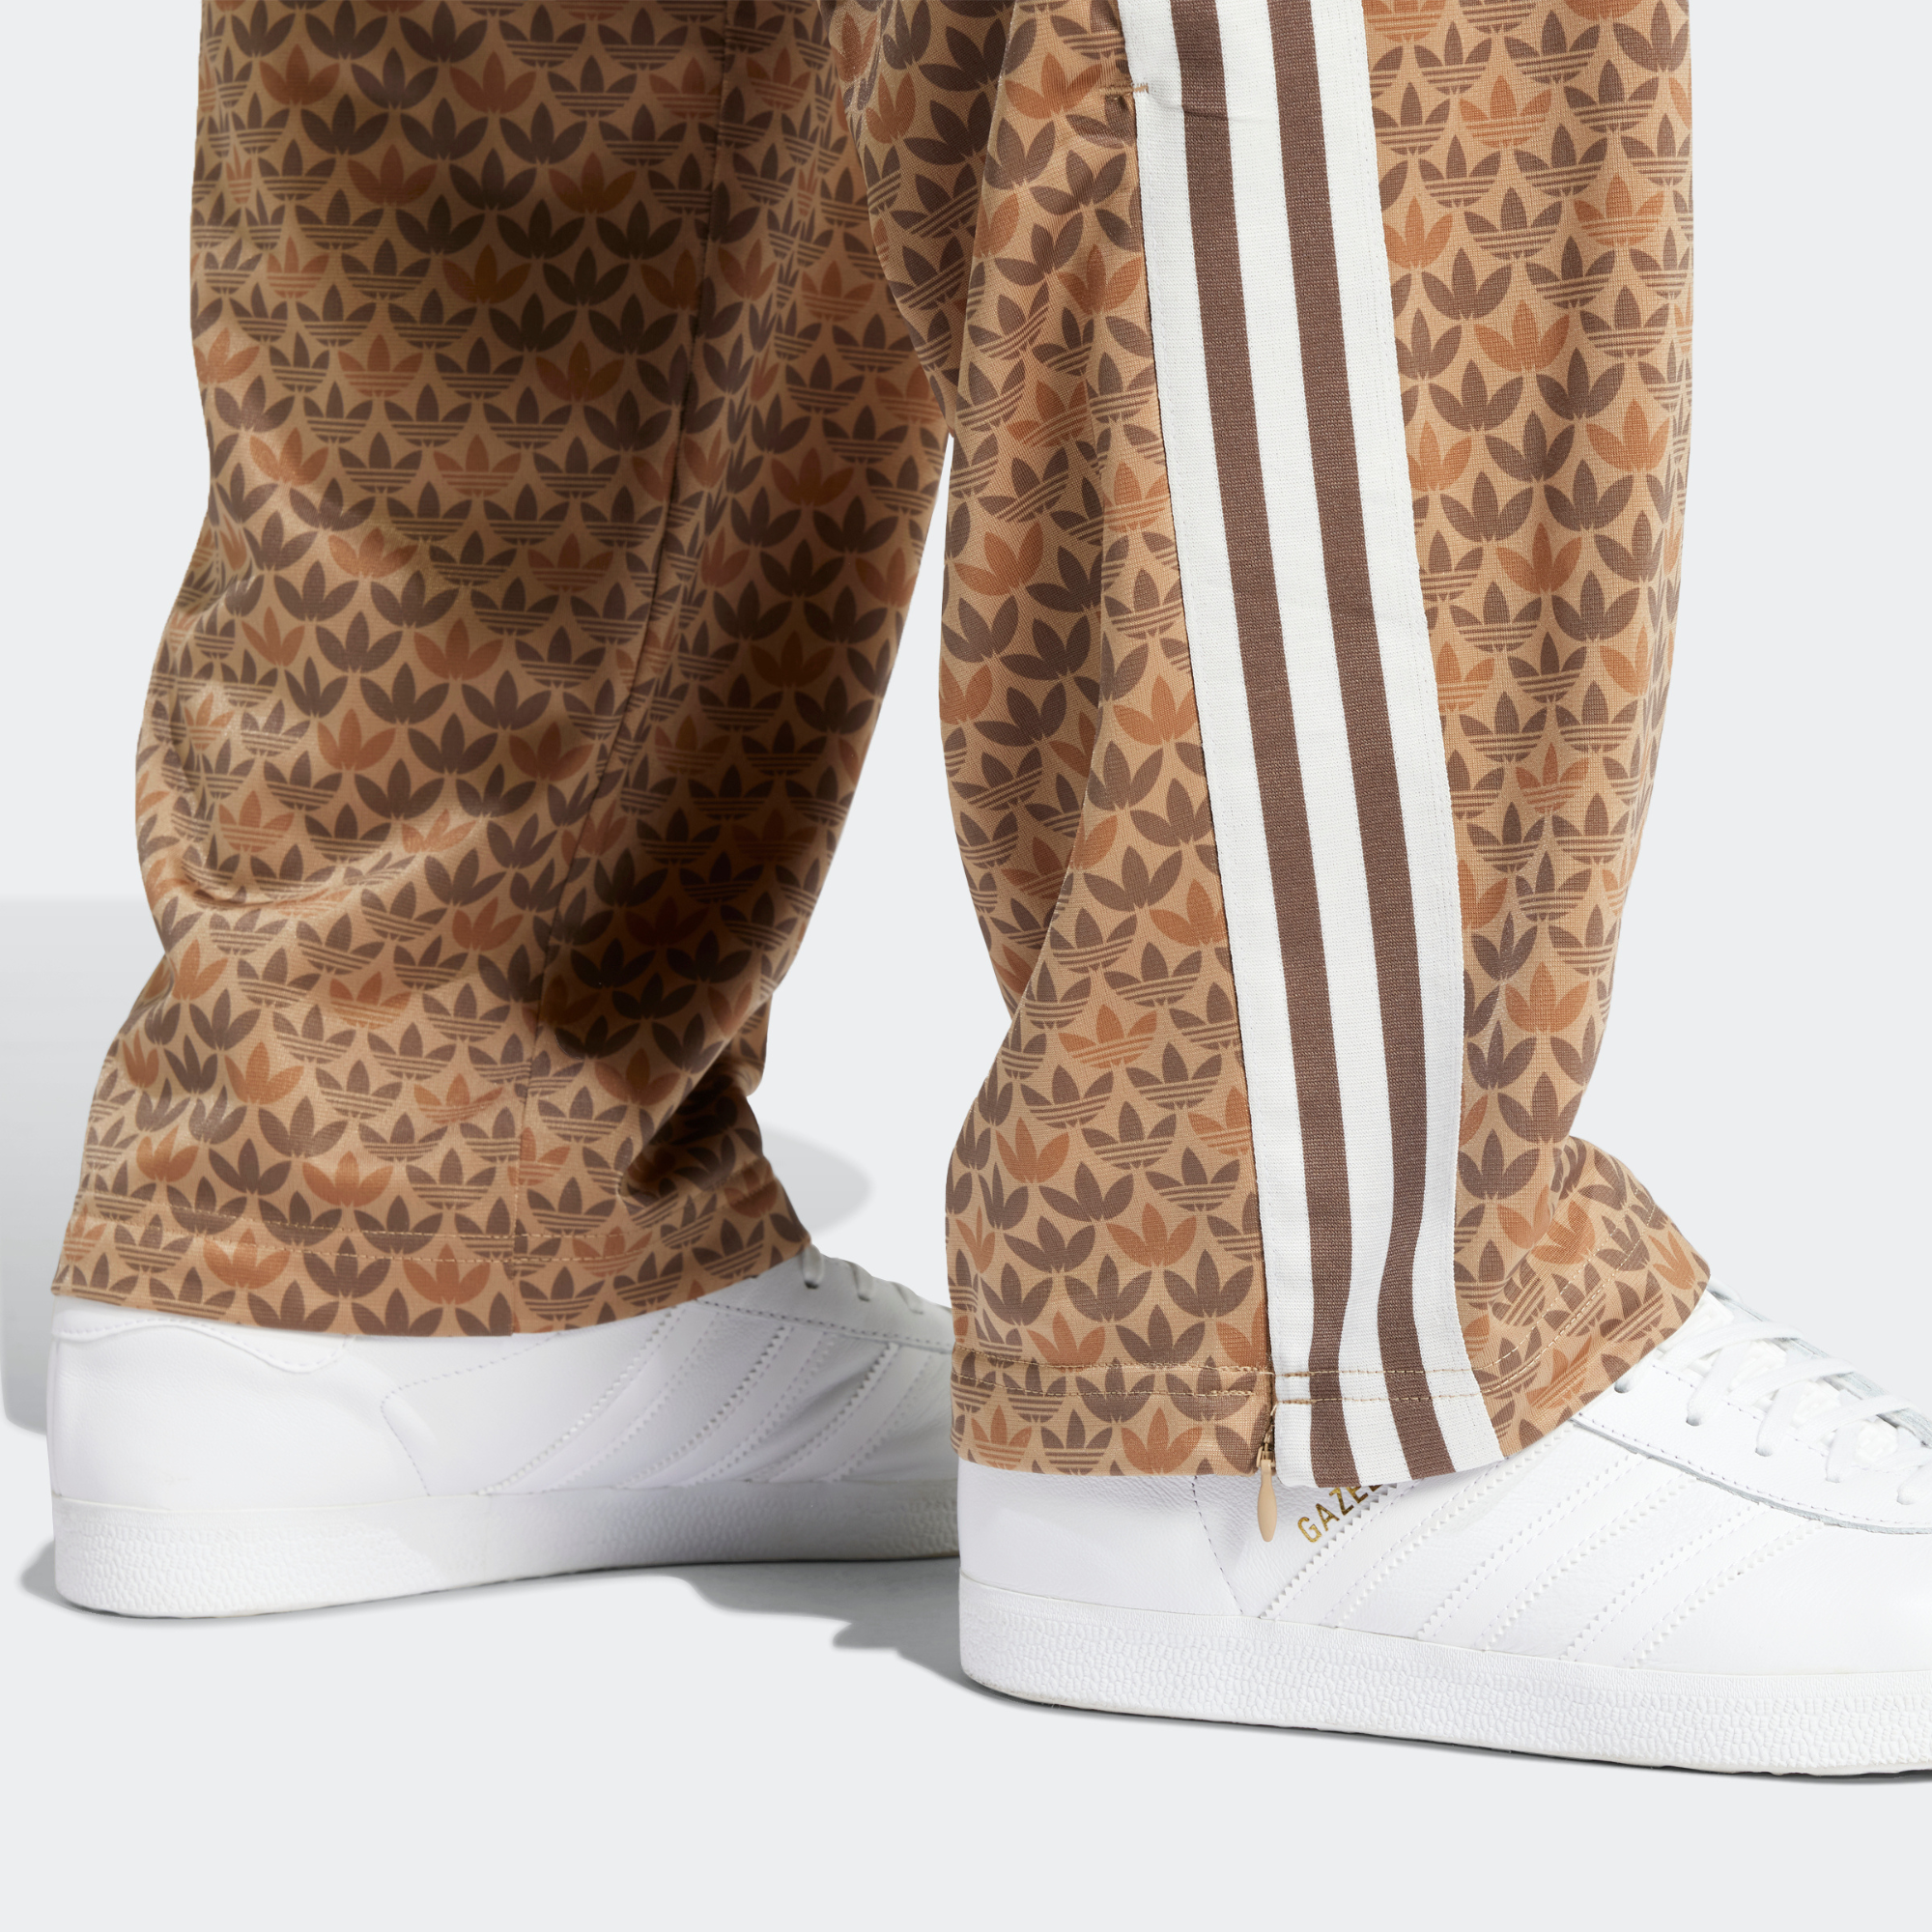 Adidas Superstar Track Pant Shadow Maroon & White